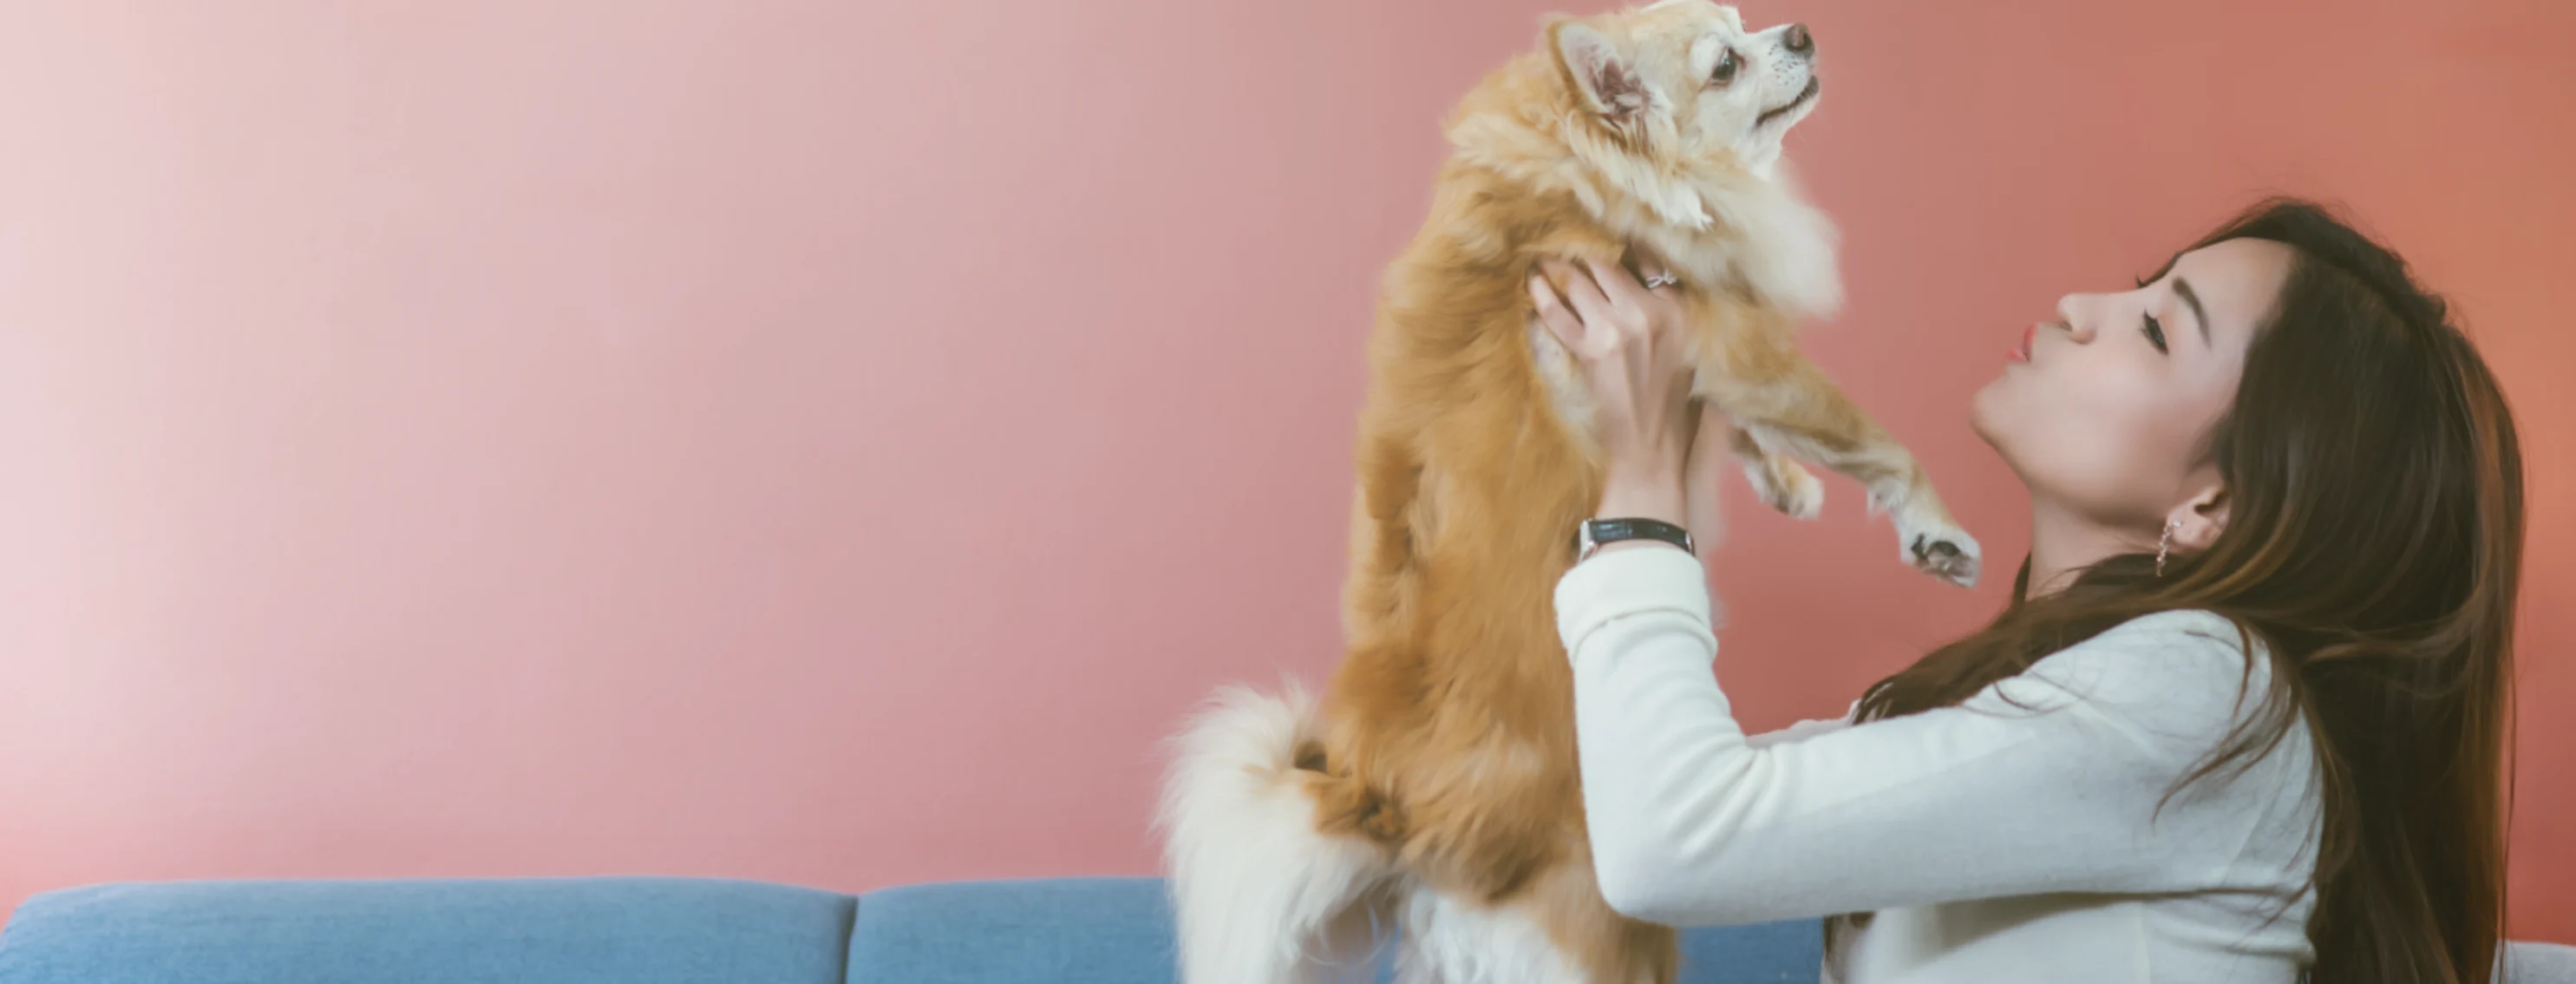 Woman holding up dog on couch